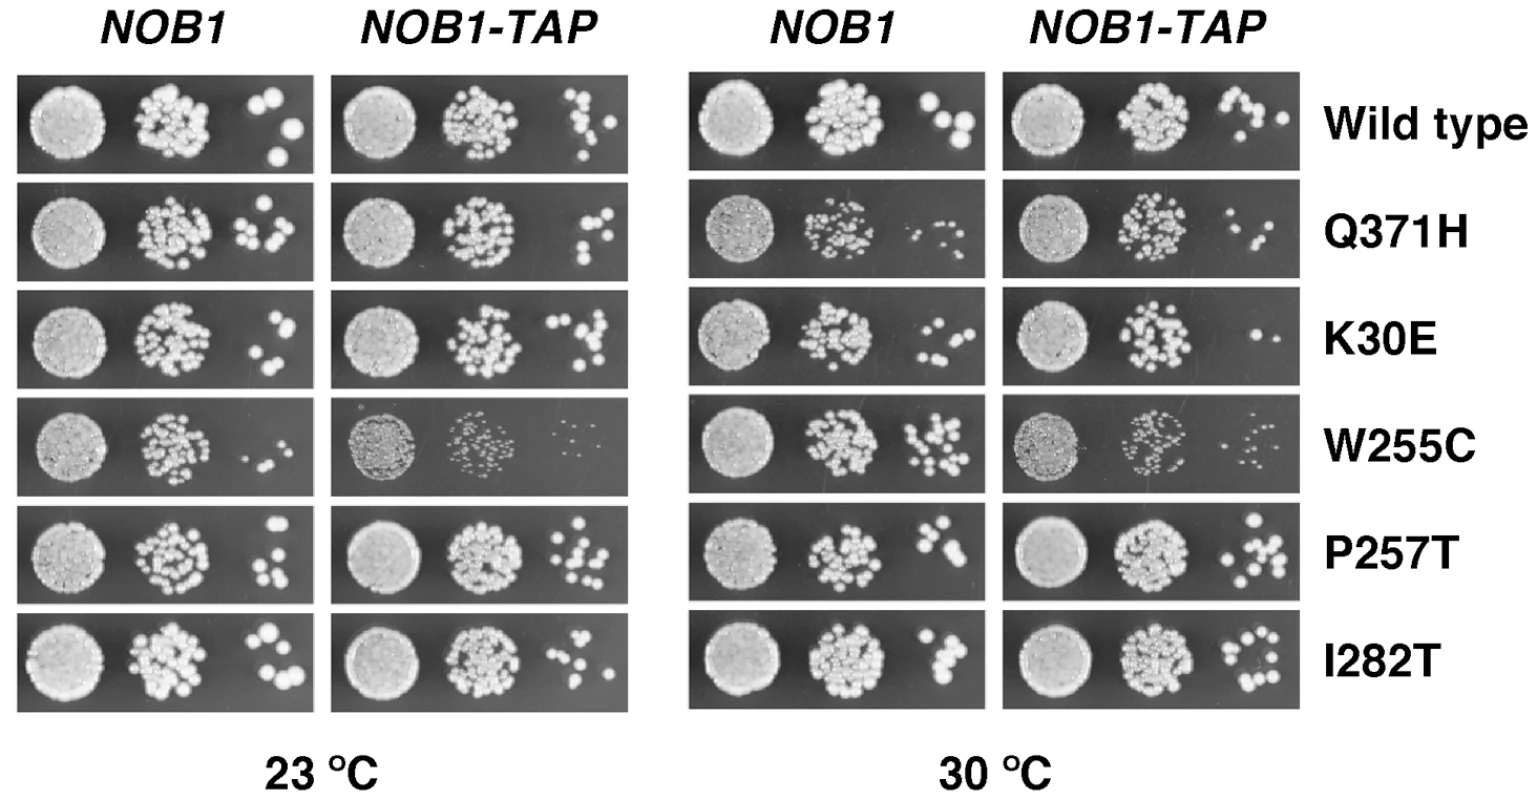 Synthetic enhancement of the slow-growth phenotype of the <i>rpl3</i>[W255C] mutant by the <i>NOB1</i>-TAP allele.